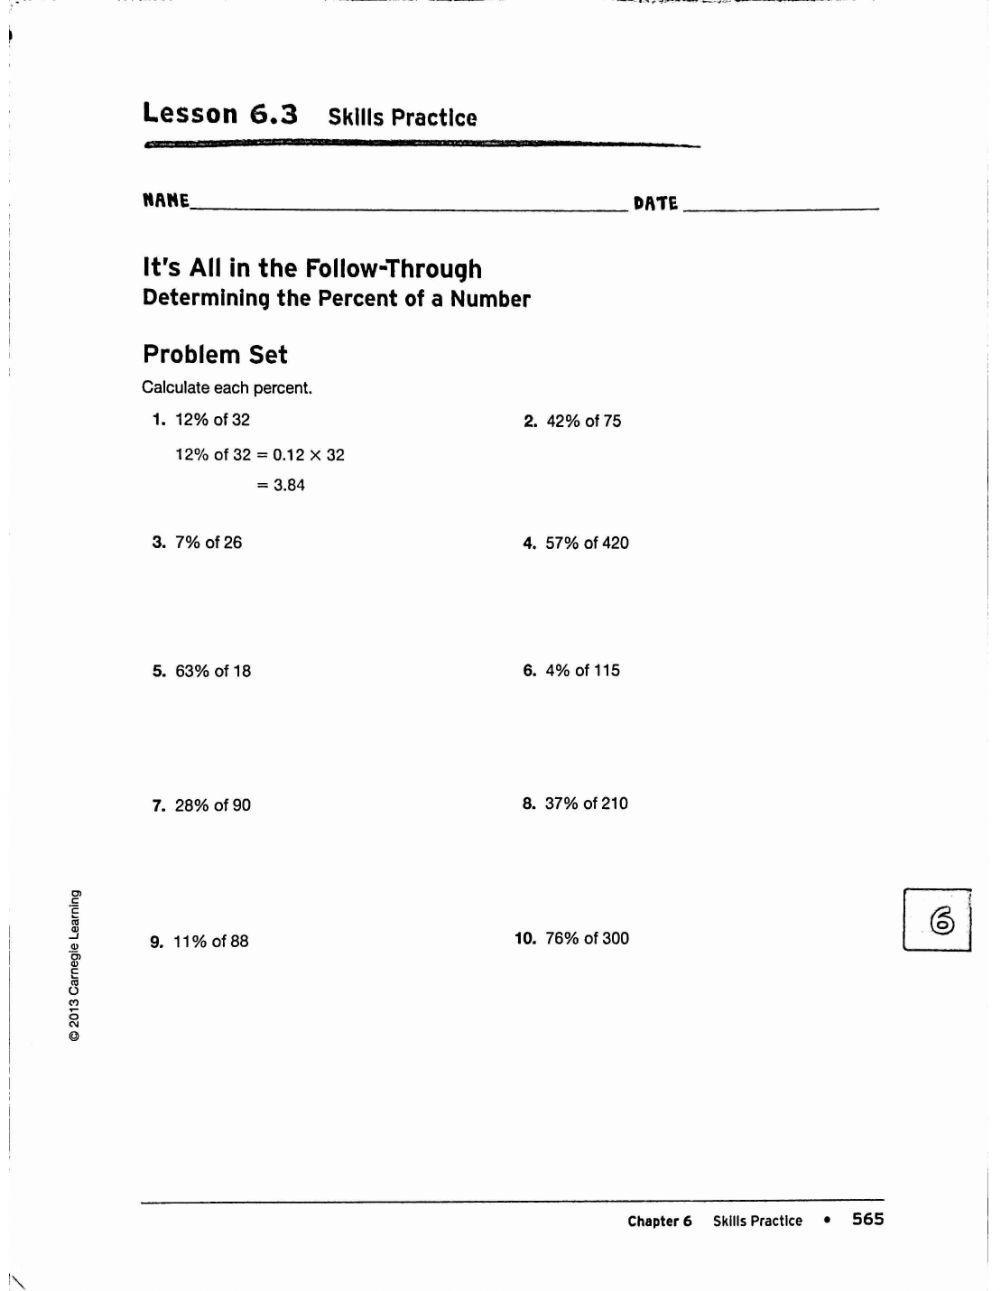 Determining the Percent of a Number (p565)